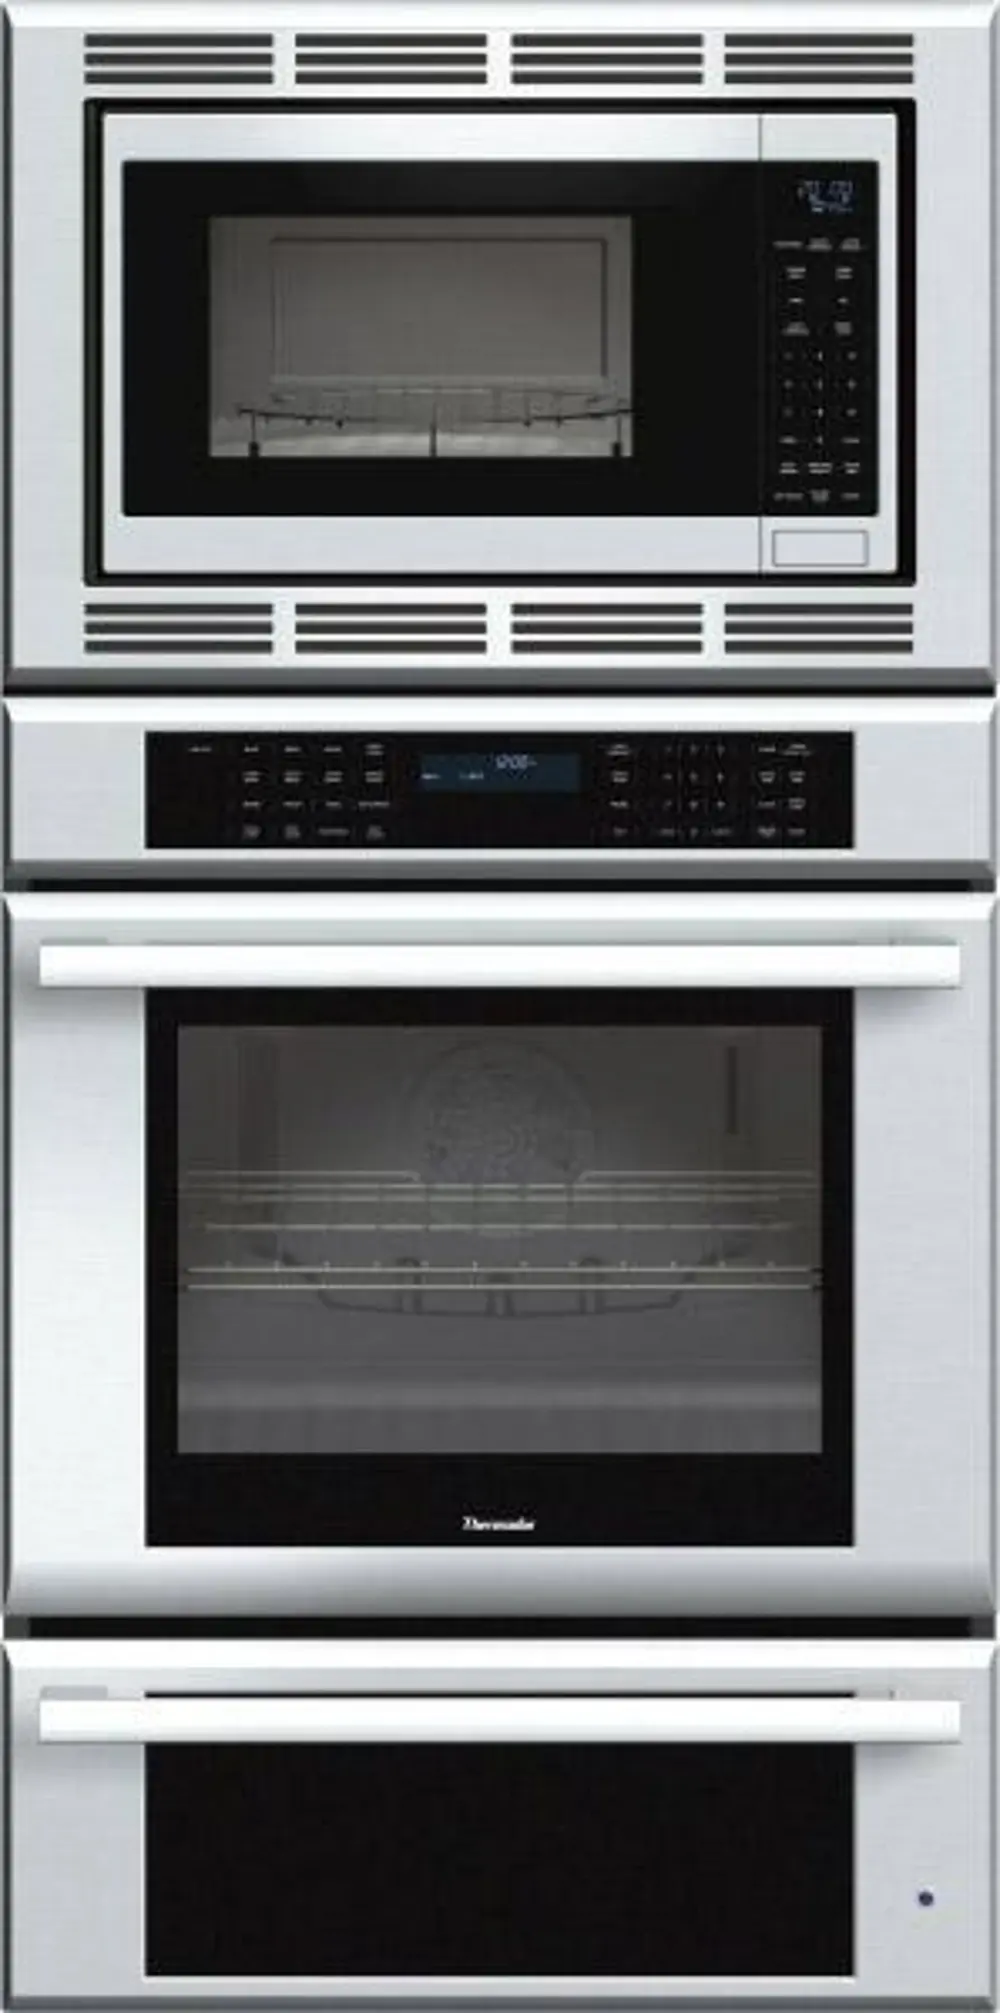 MEDMCW31JS Thermador Convection Combo Oven - Stainless Steel-1